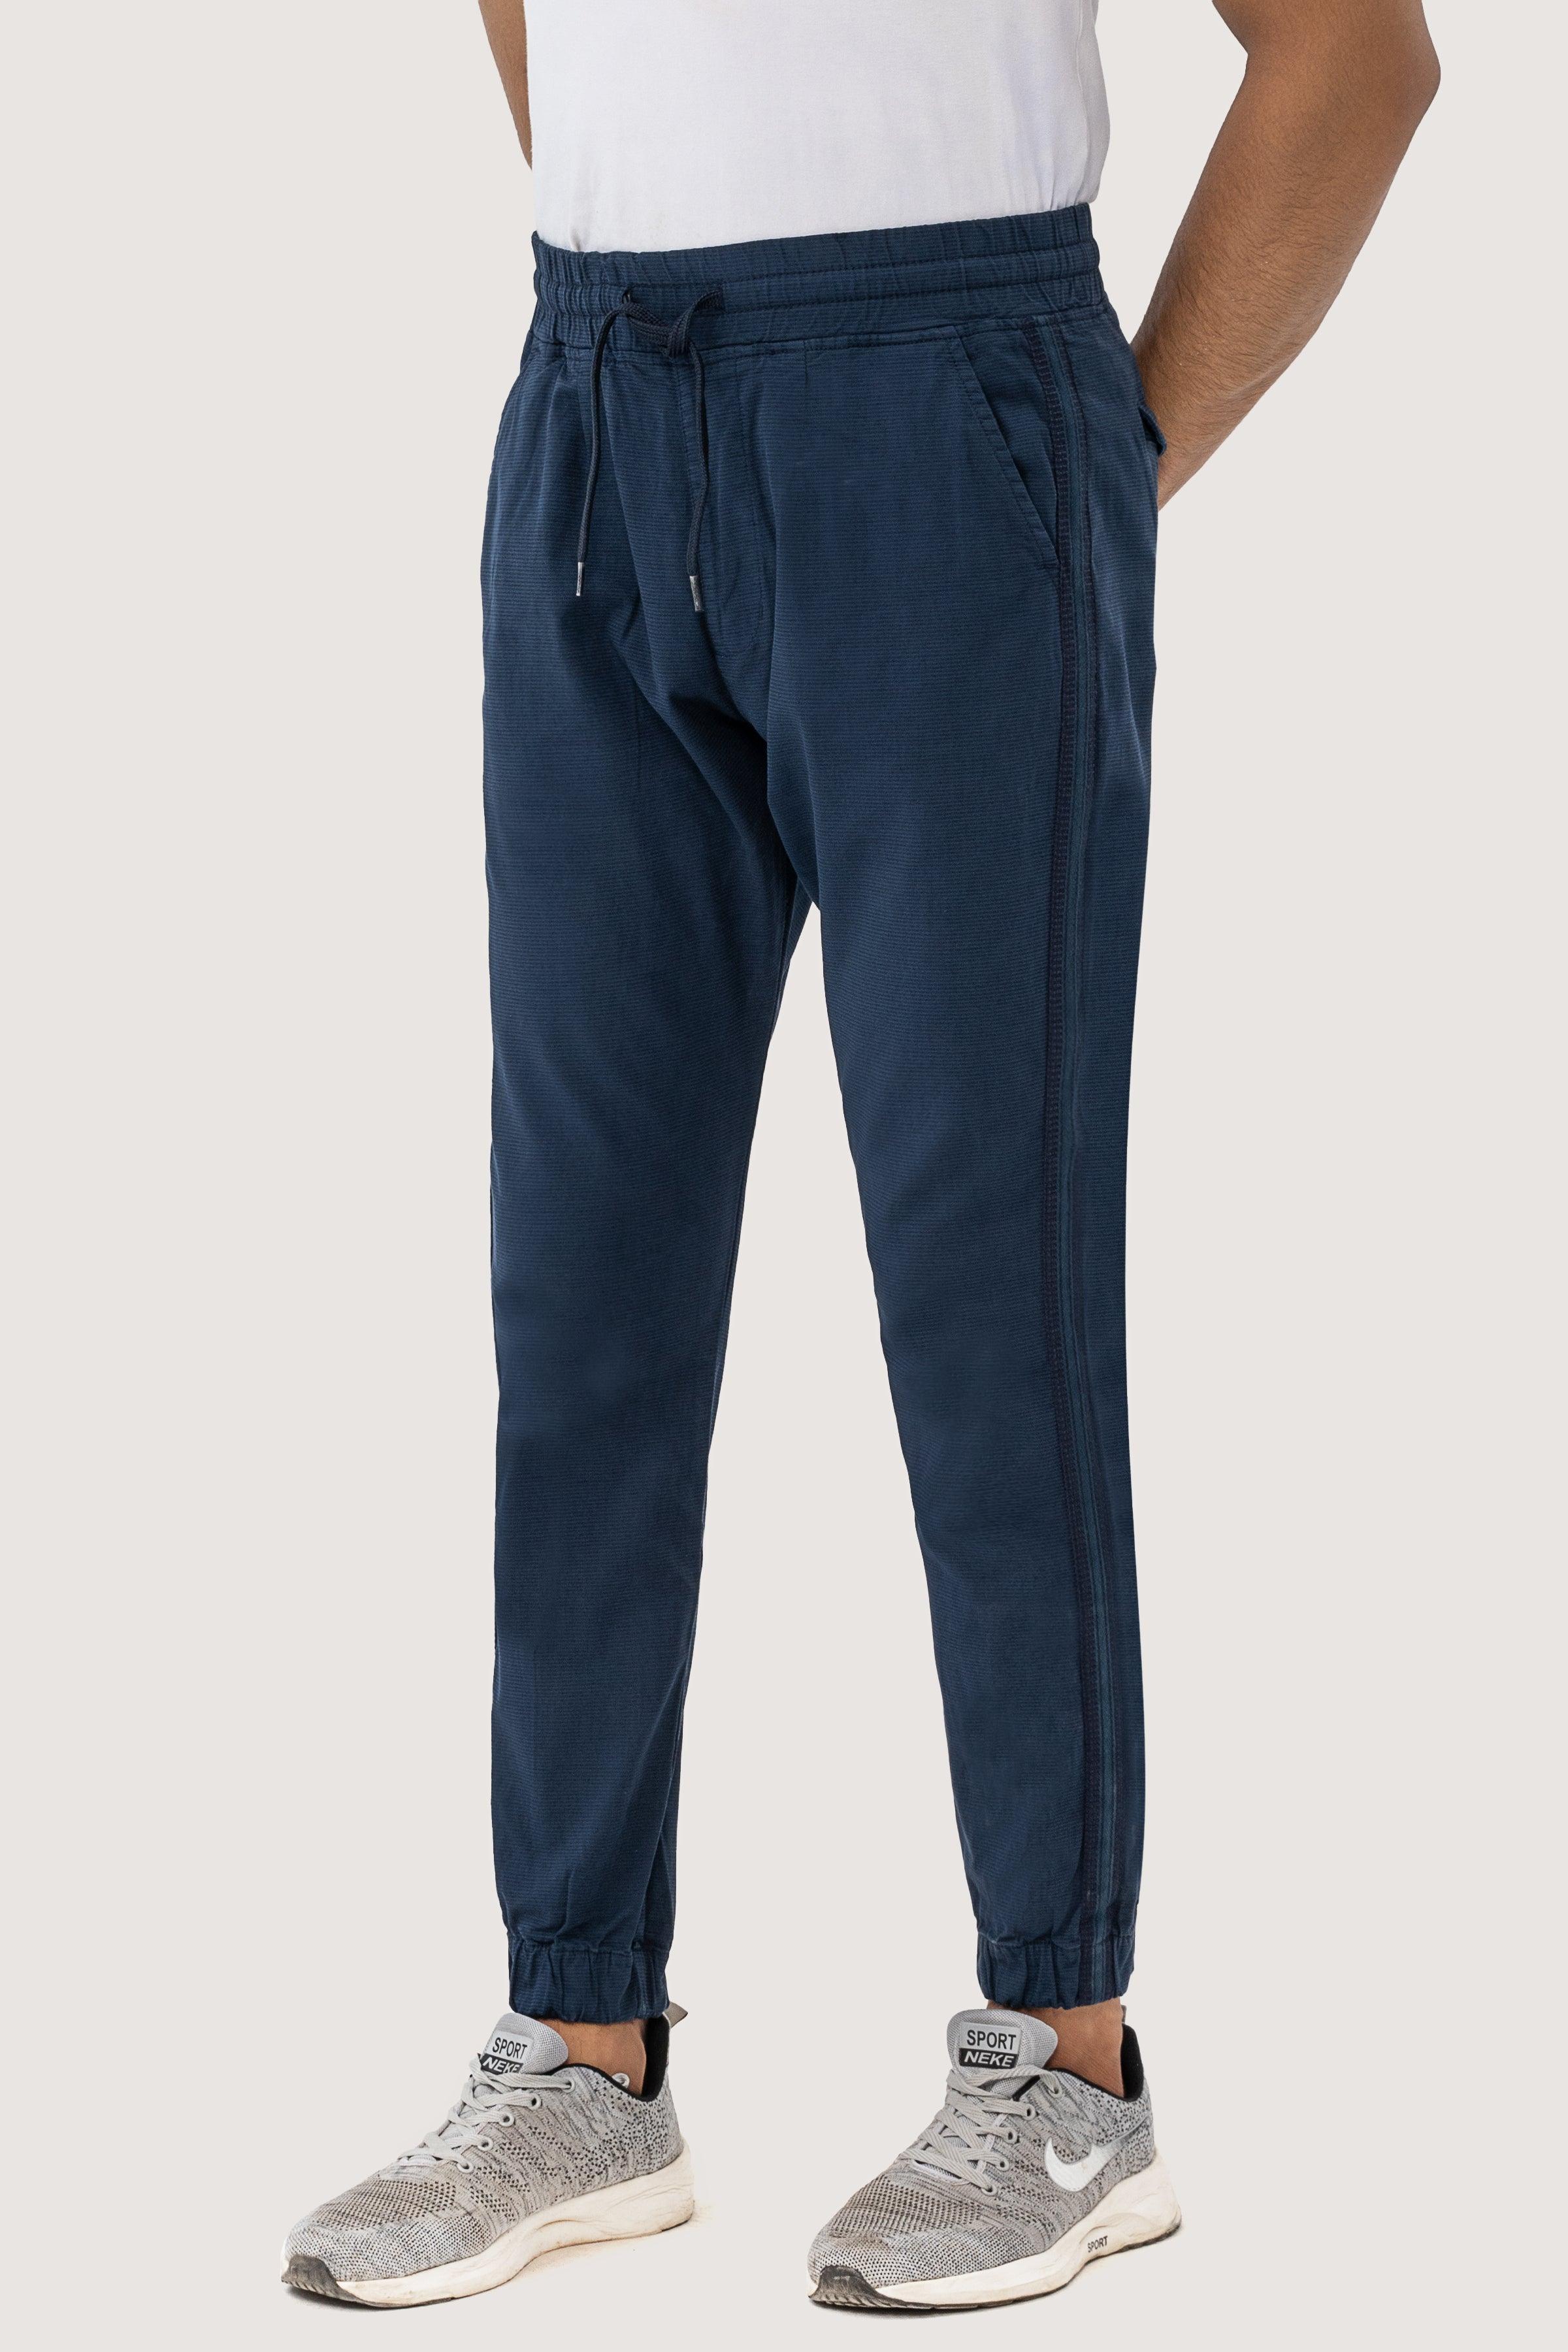 SELF TEXTURED CONTRAST TAPE TROUSER NAVY at Charcoal Clothing